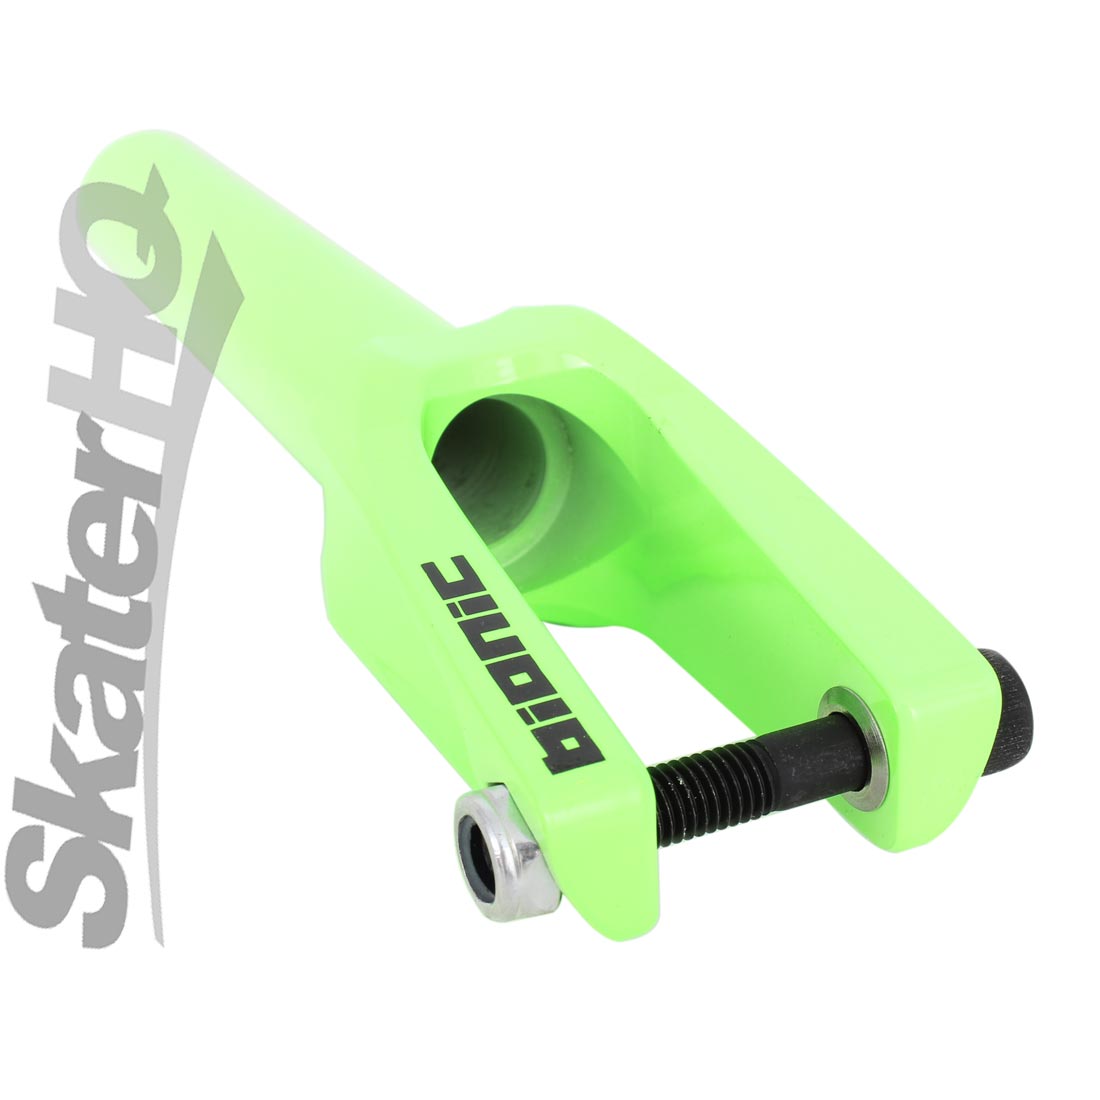 Sacrifice Bionic SCS Fork - Neon Green Scooter Forks